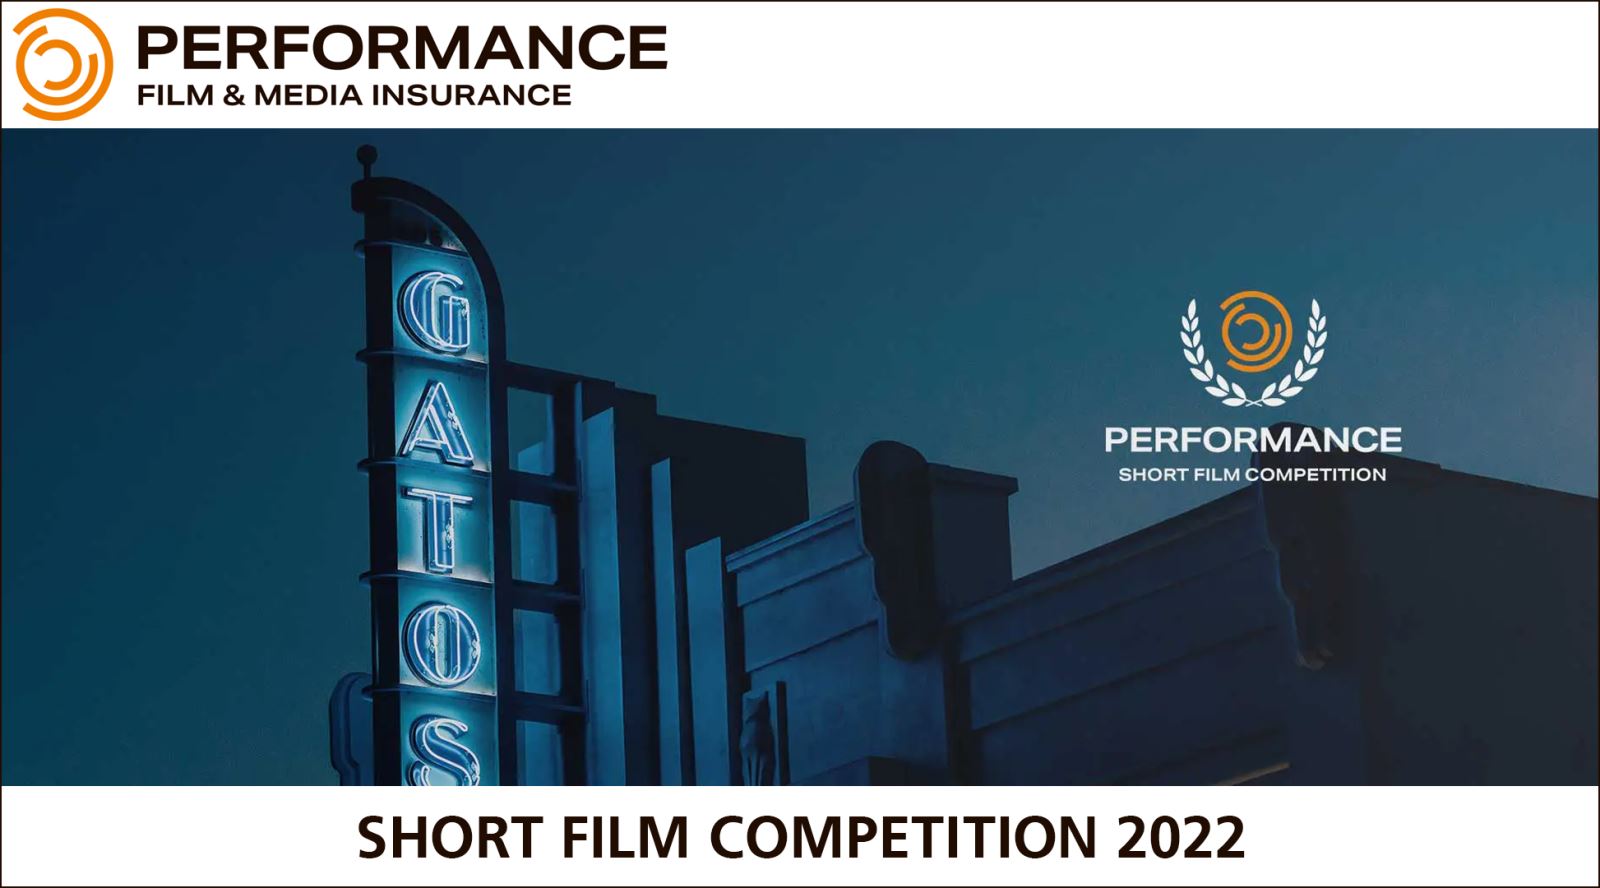 Performance Short Film Competition for 2022